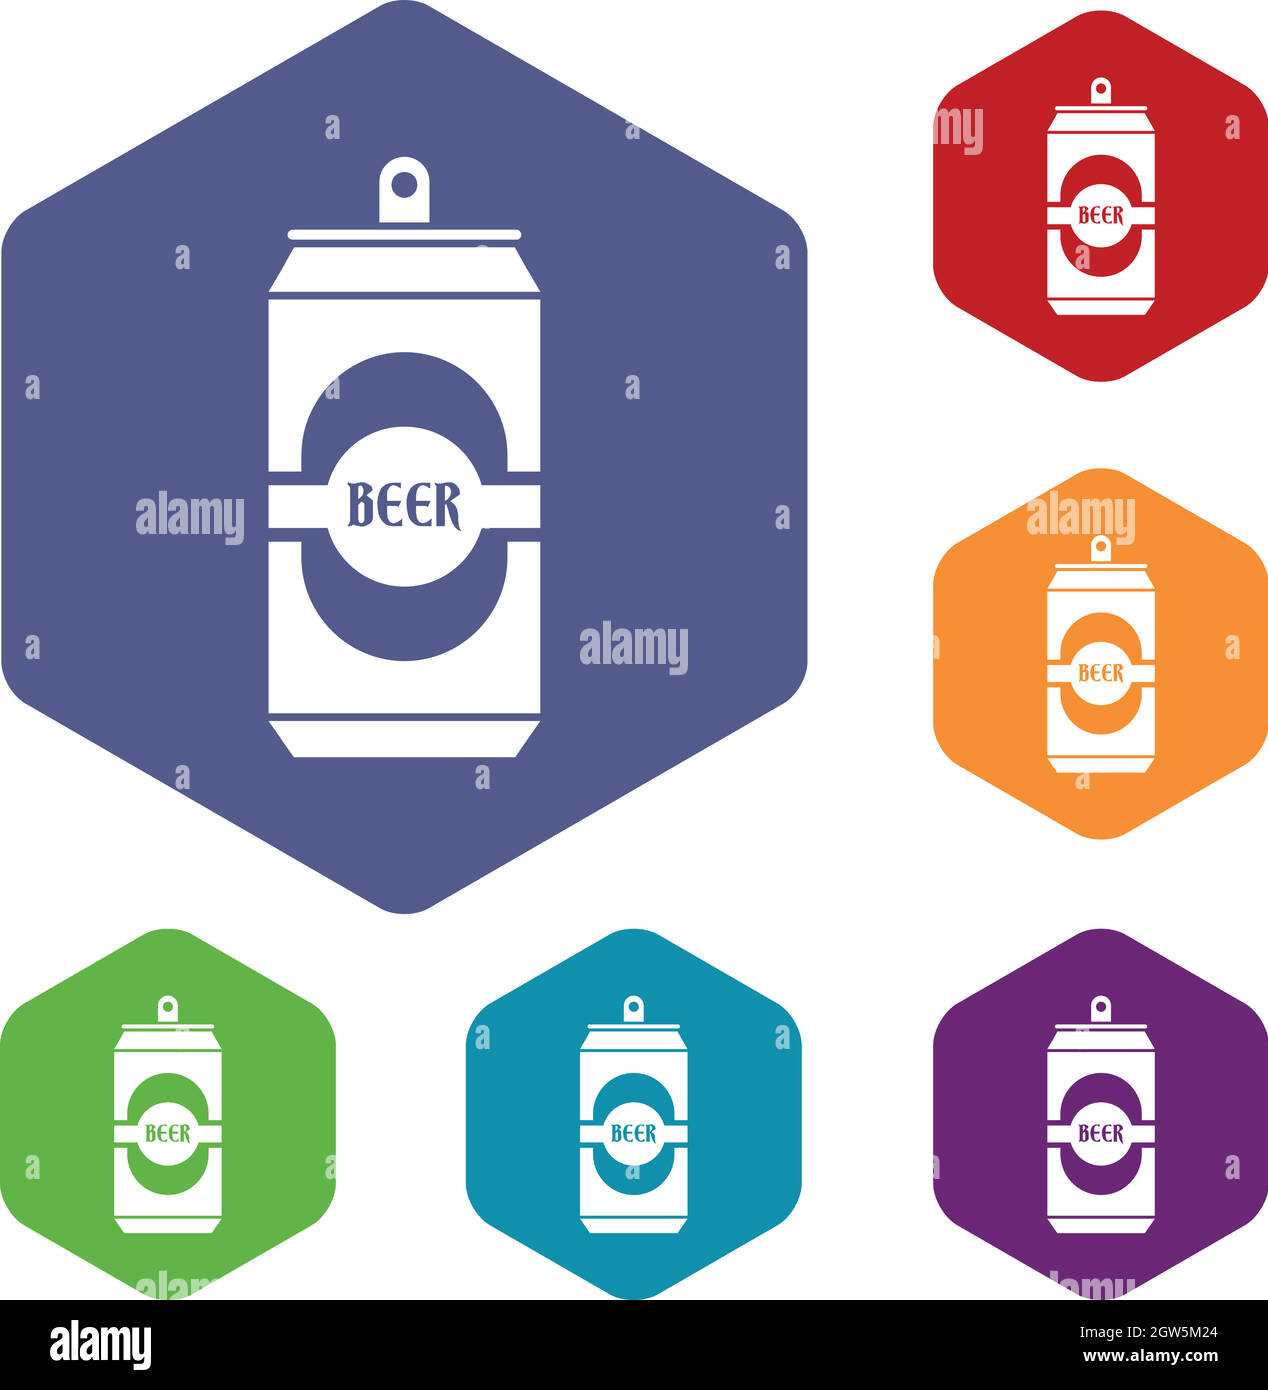 Aluminum can icons set Stock Vector